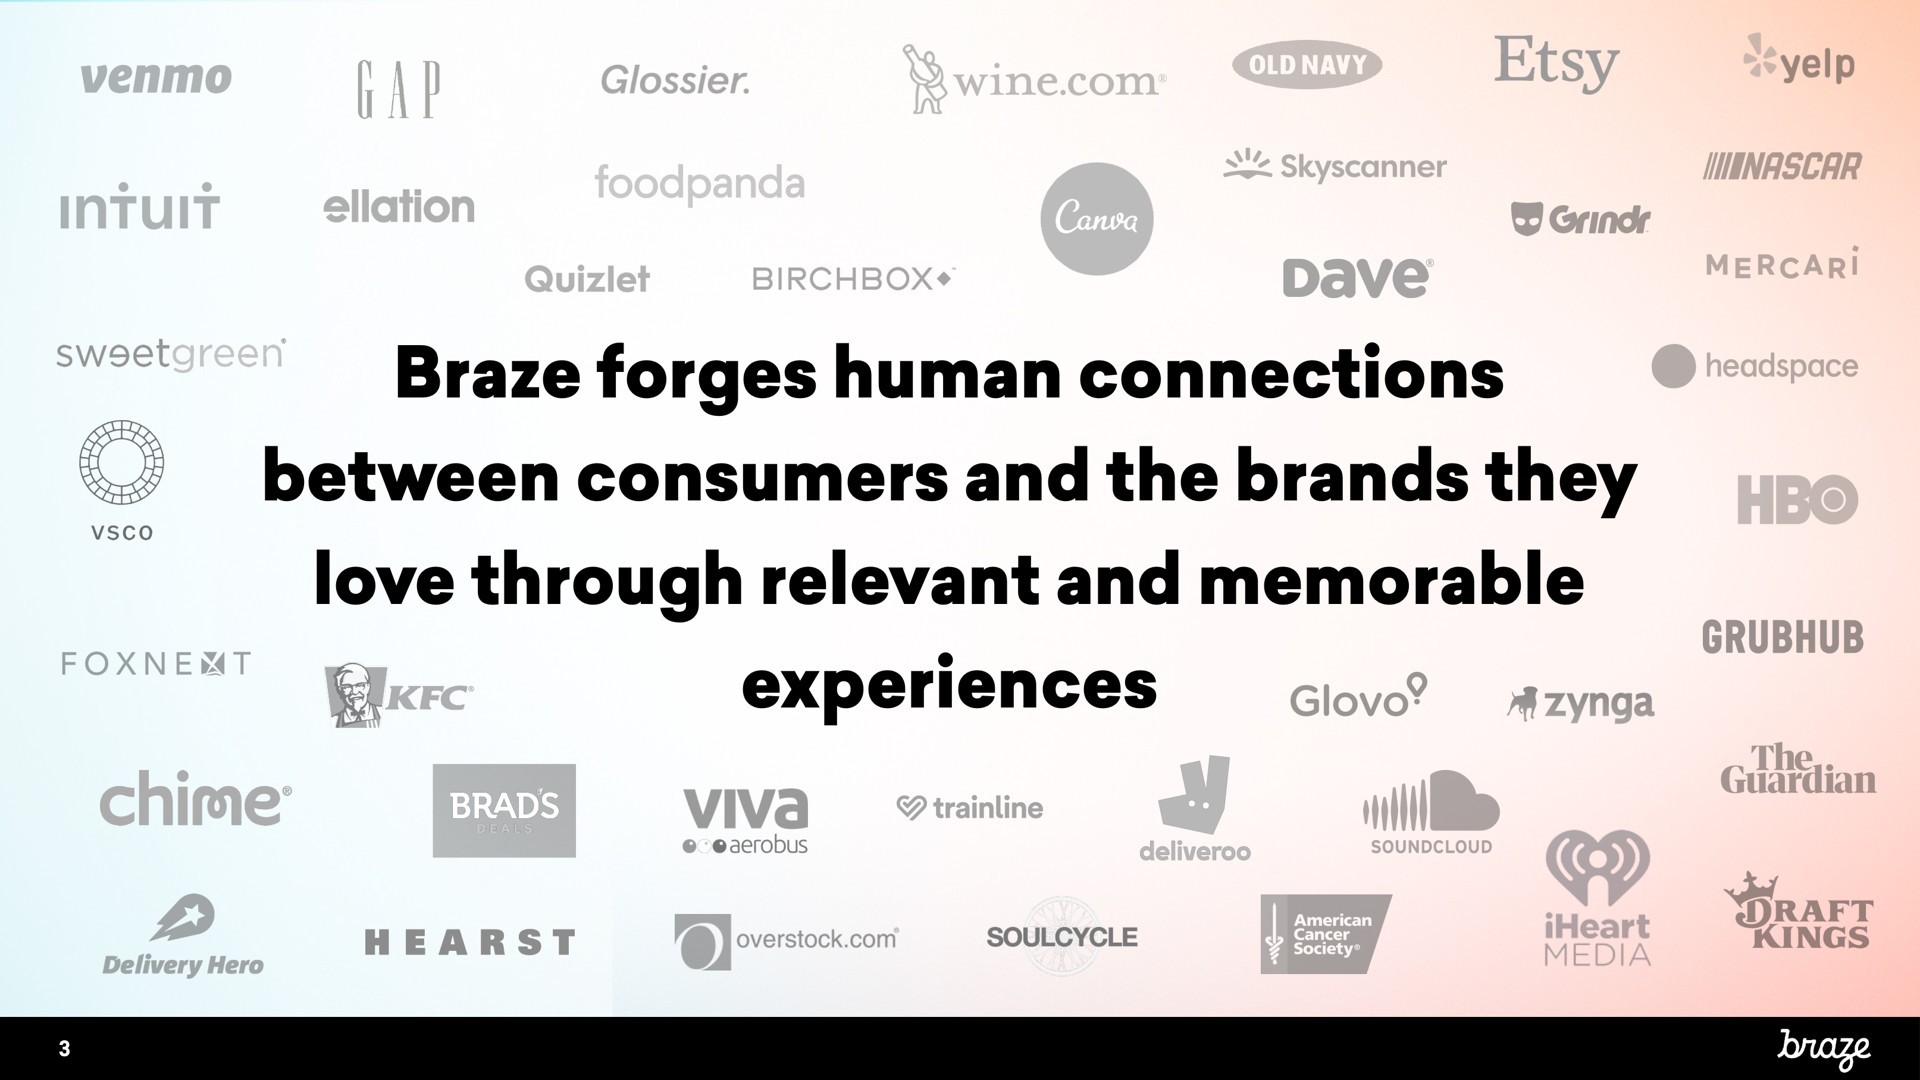 braze forges human connections between consumers and the brands they love through relevant and memorable experiences | Braze